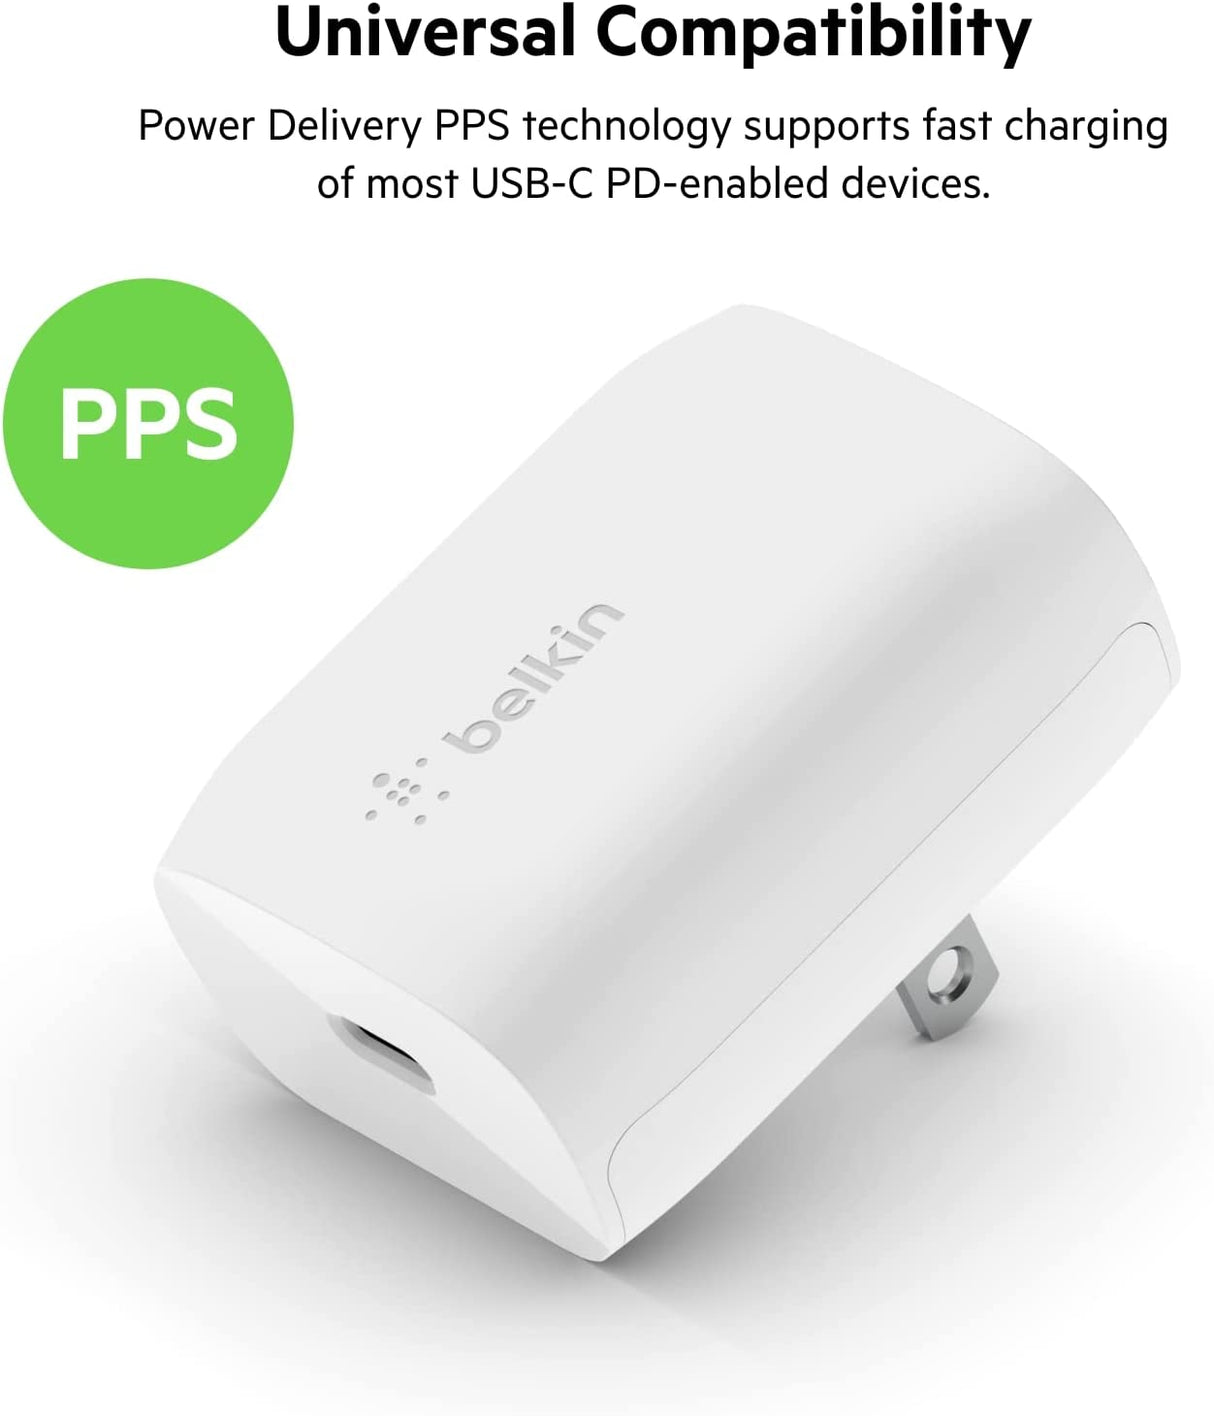 Belkin 20W USB Type C Power Delivery Wall Charger, Fast Charging with Certified USB-C PD 3.1 PPS, Travel Sized Compact Design for iPhone 14, 14 Pro, 14 Pro Max, 14 Plus, iPad, Galaxy, Pixel and More